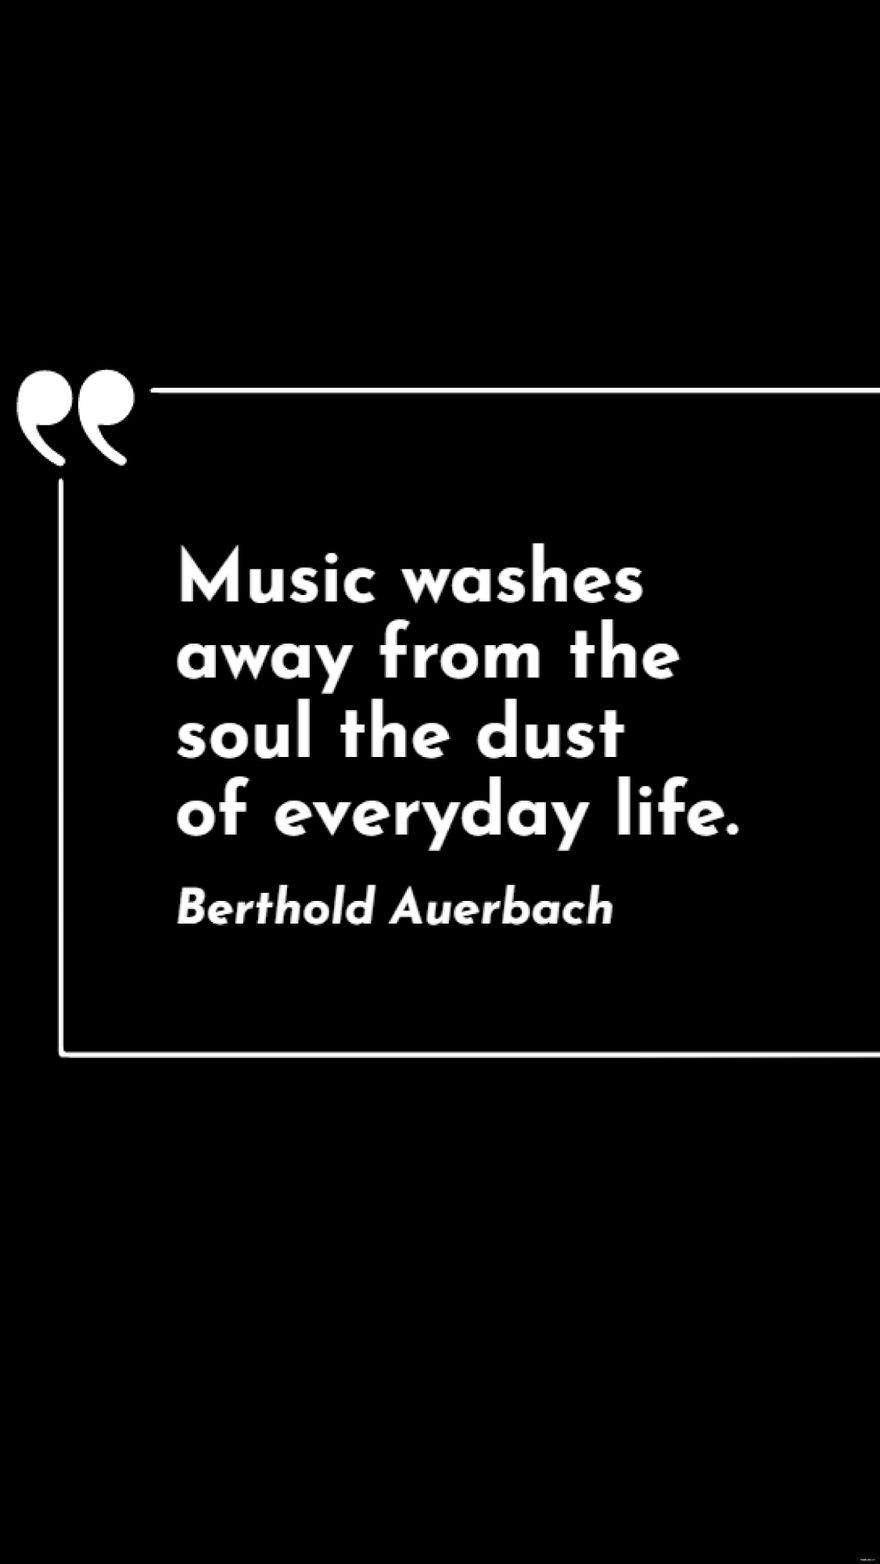 Berthold Auerbach - Music washes away from the soul the dust of everyday life. in JPG